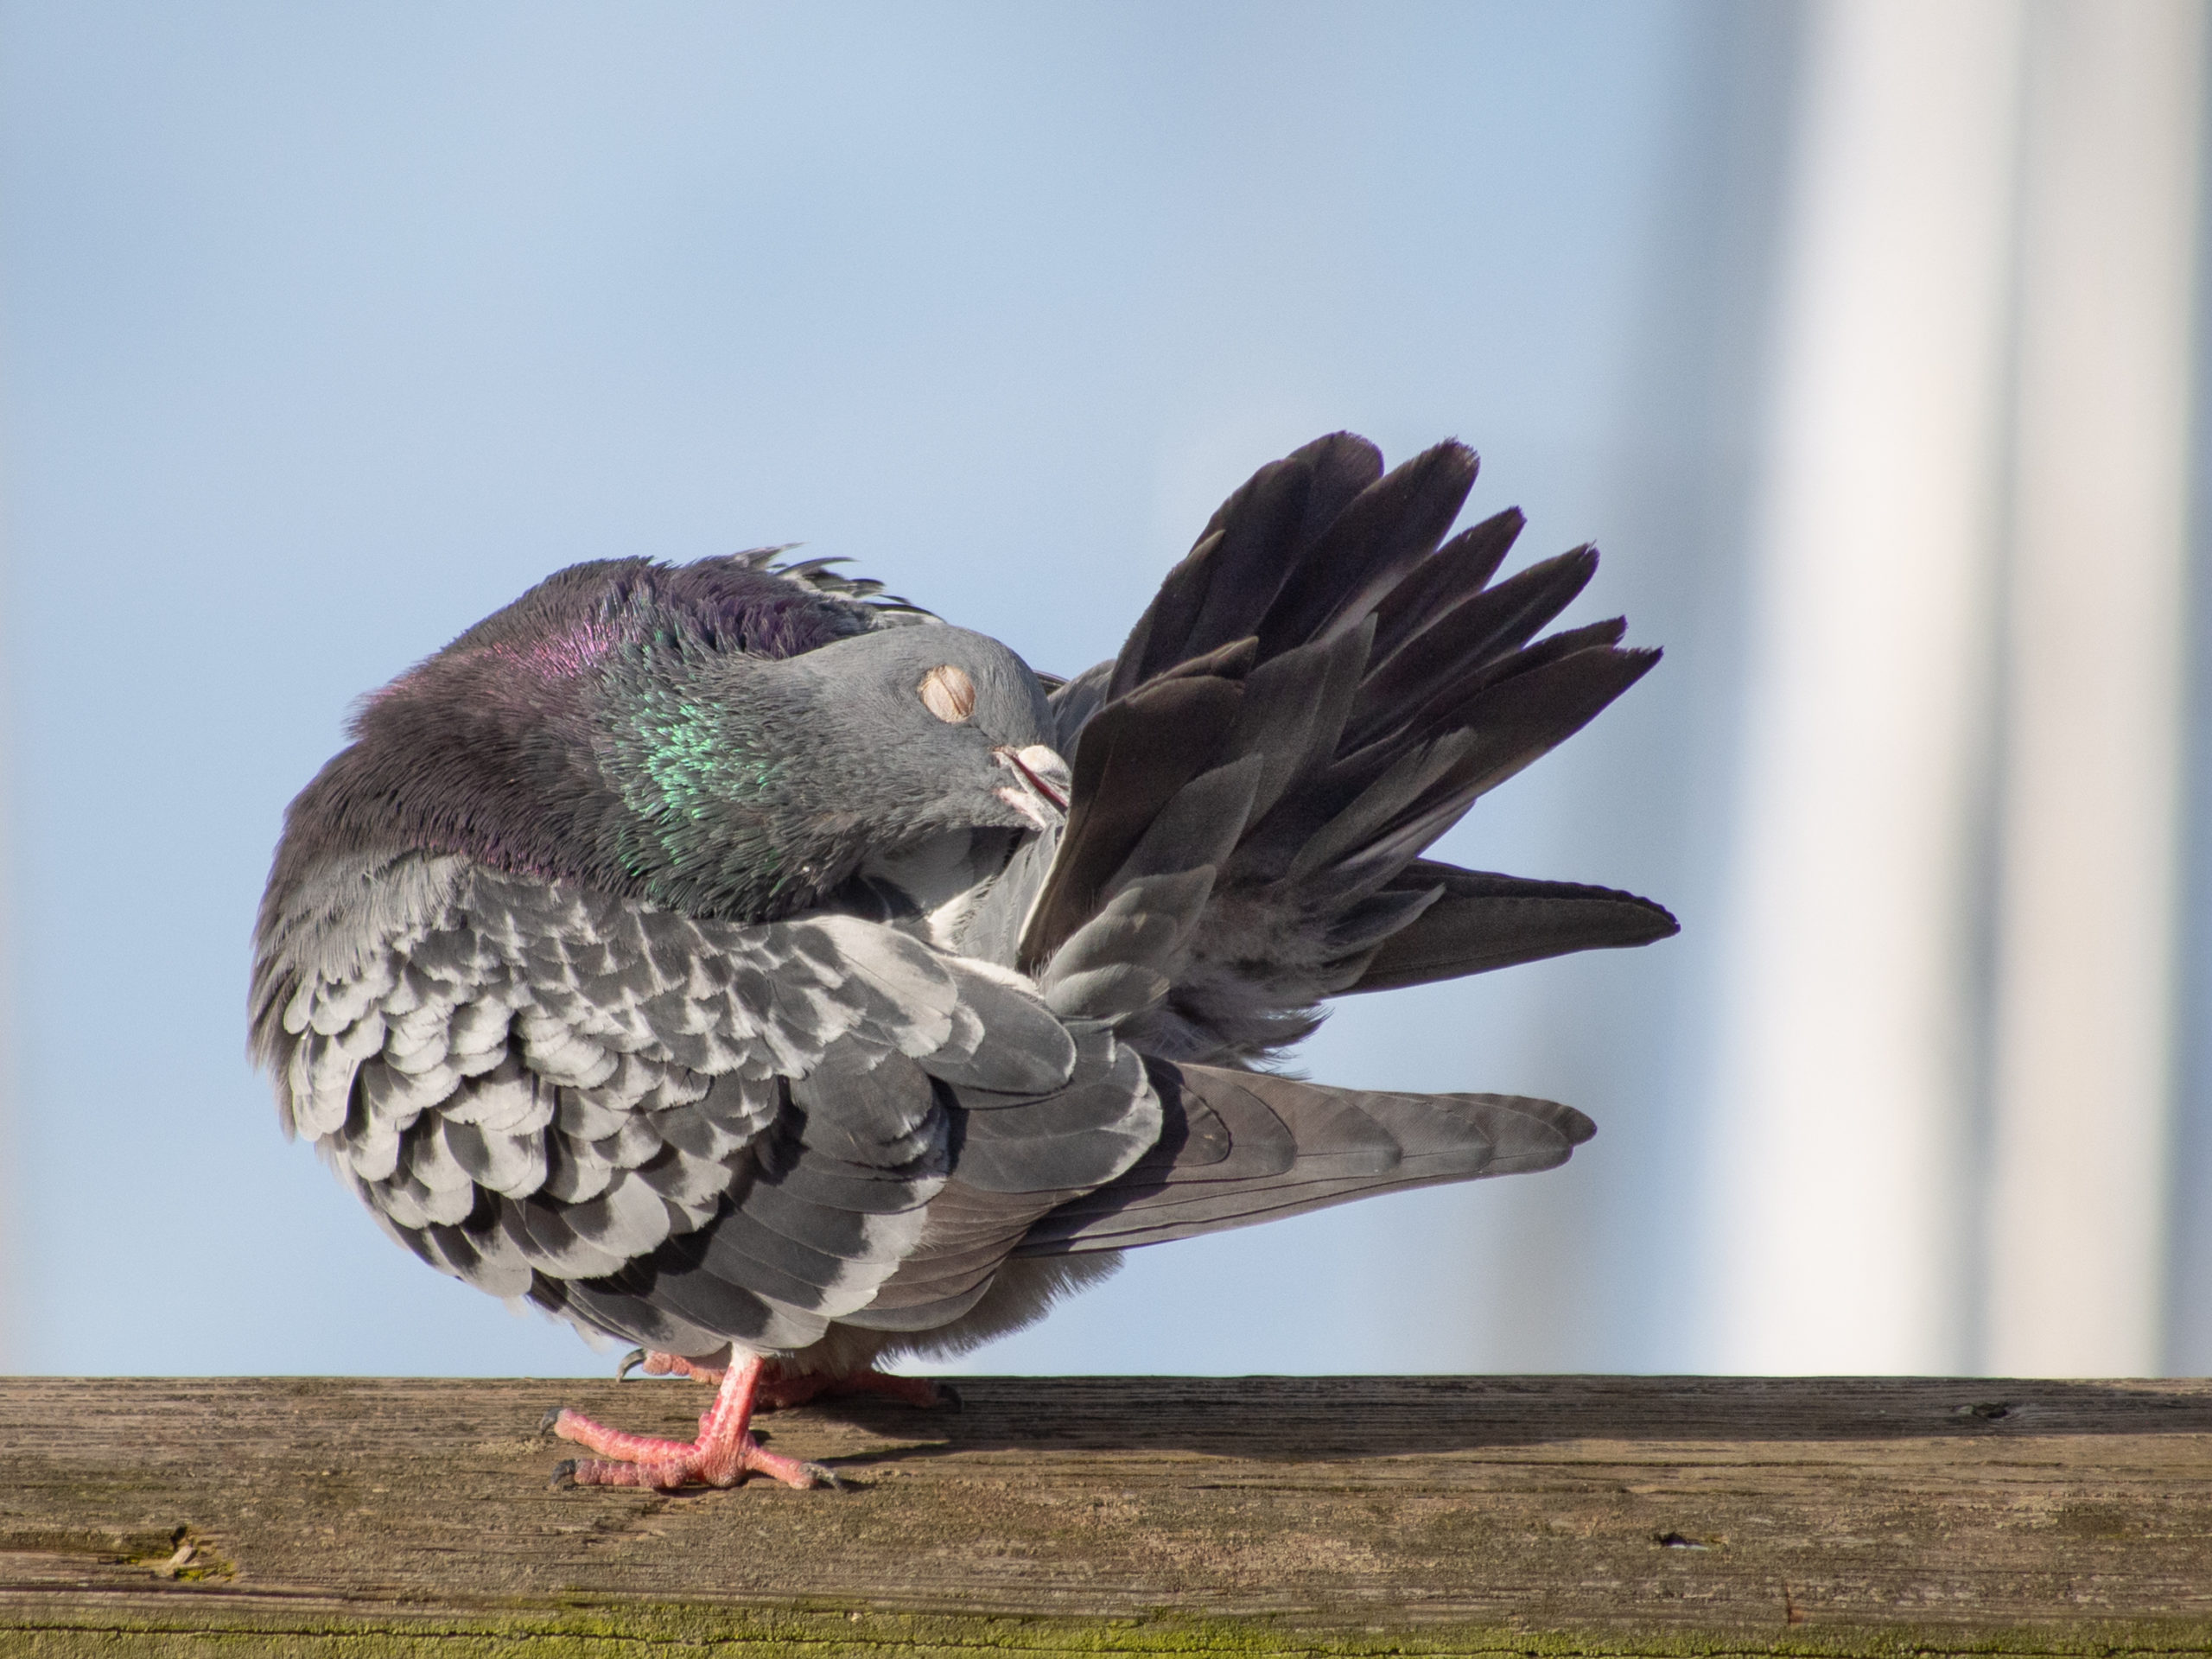 Pigeon Preening Tail Feathers